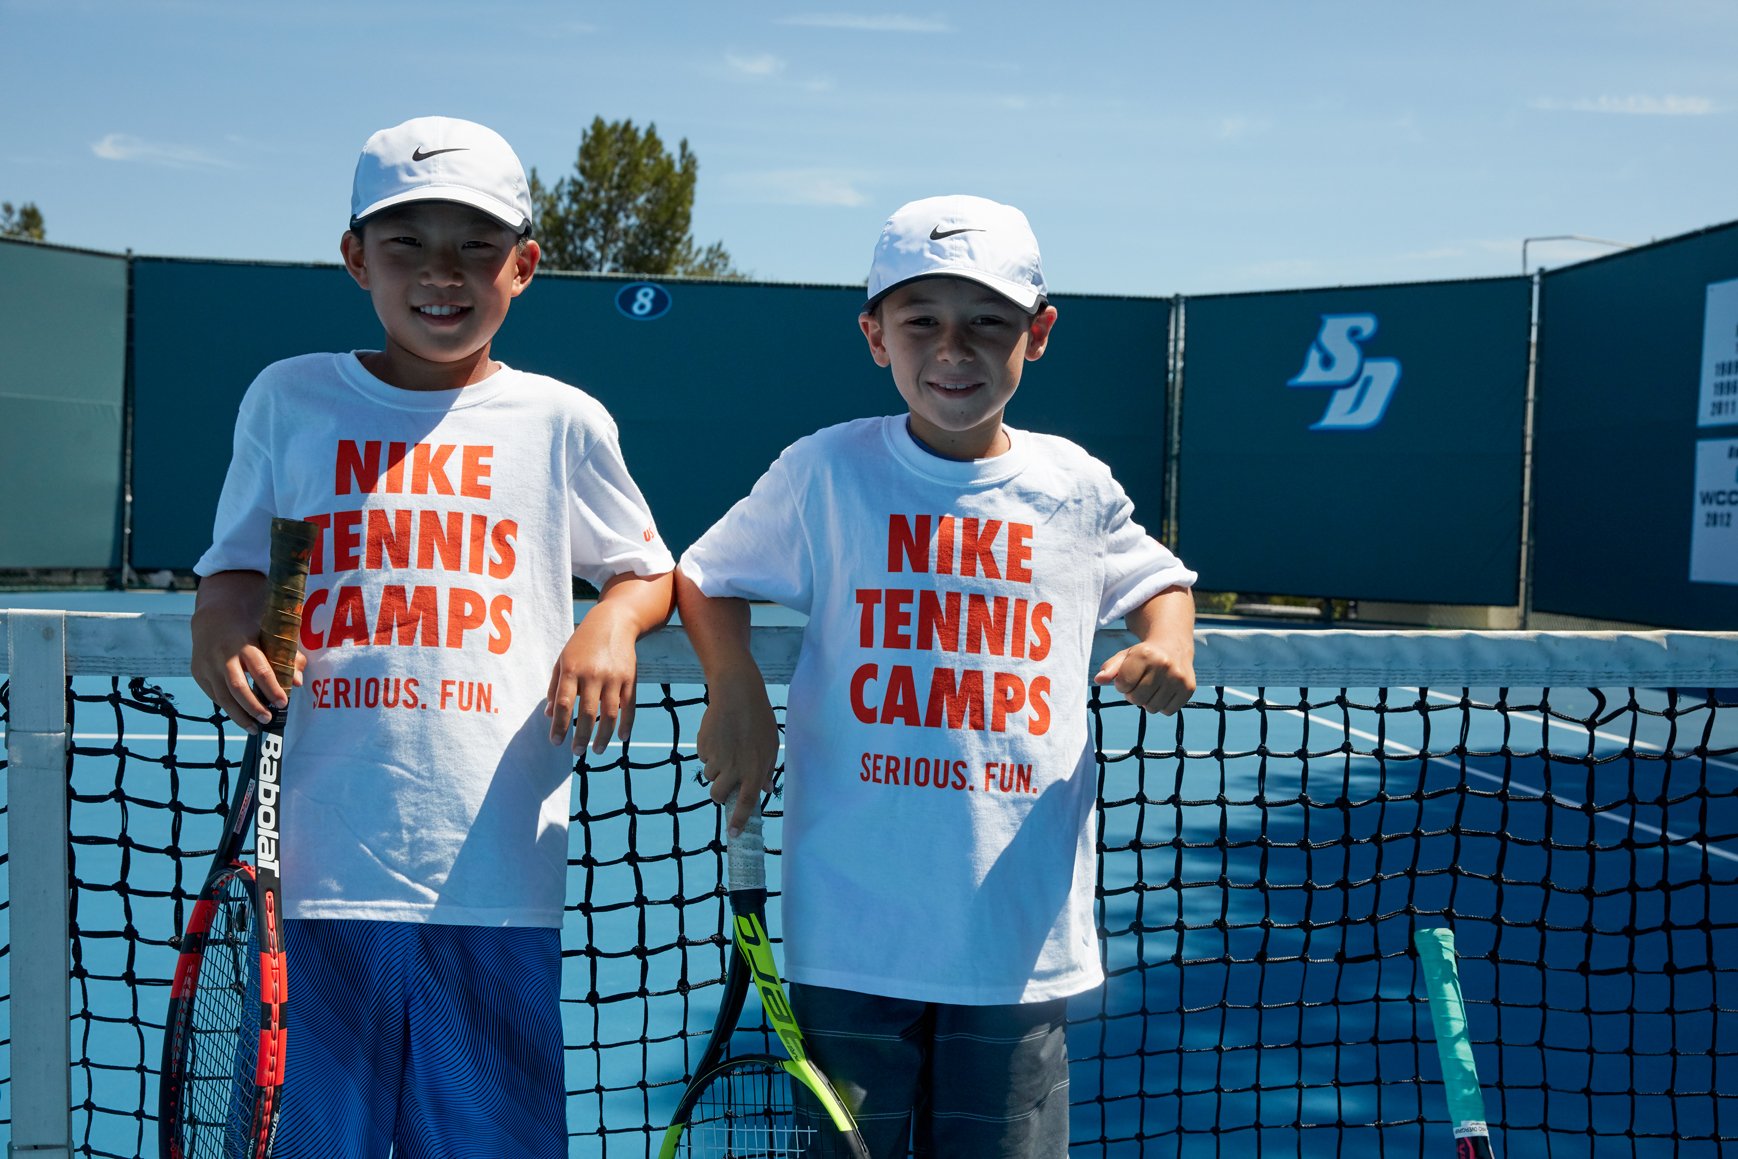 Nike Tennis Camps (@NikeTennisCamps) / Twitter